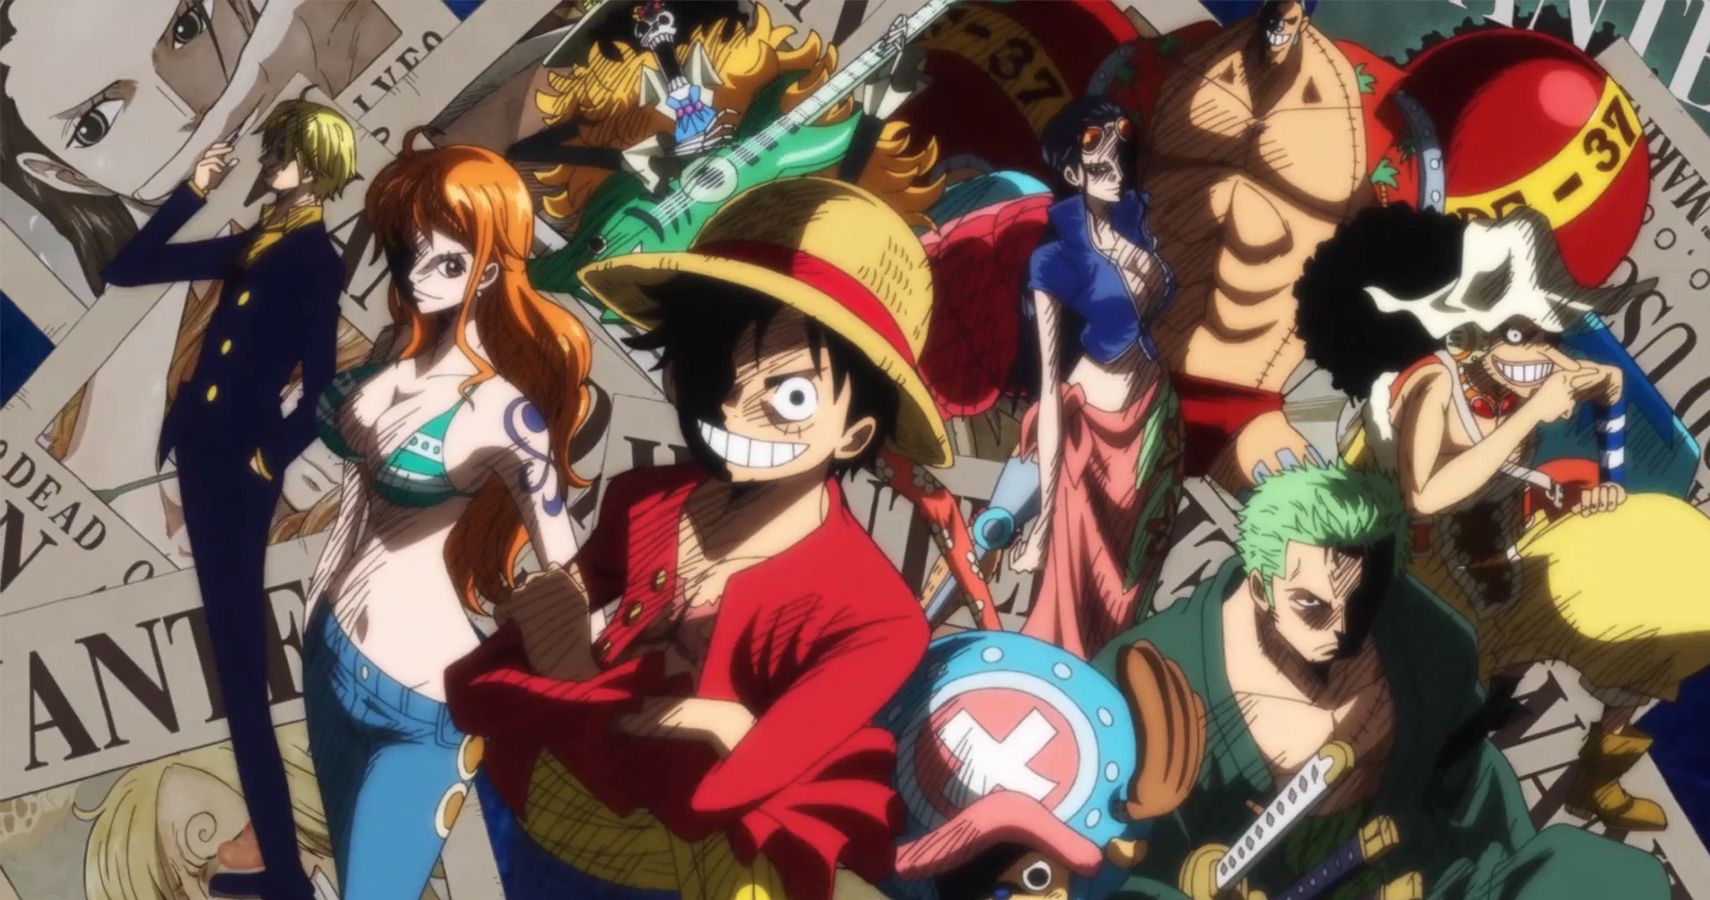 These 'One Piece' Manga/Anime Storylines Are Essential Ahead of the Series